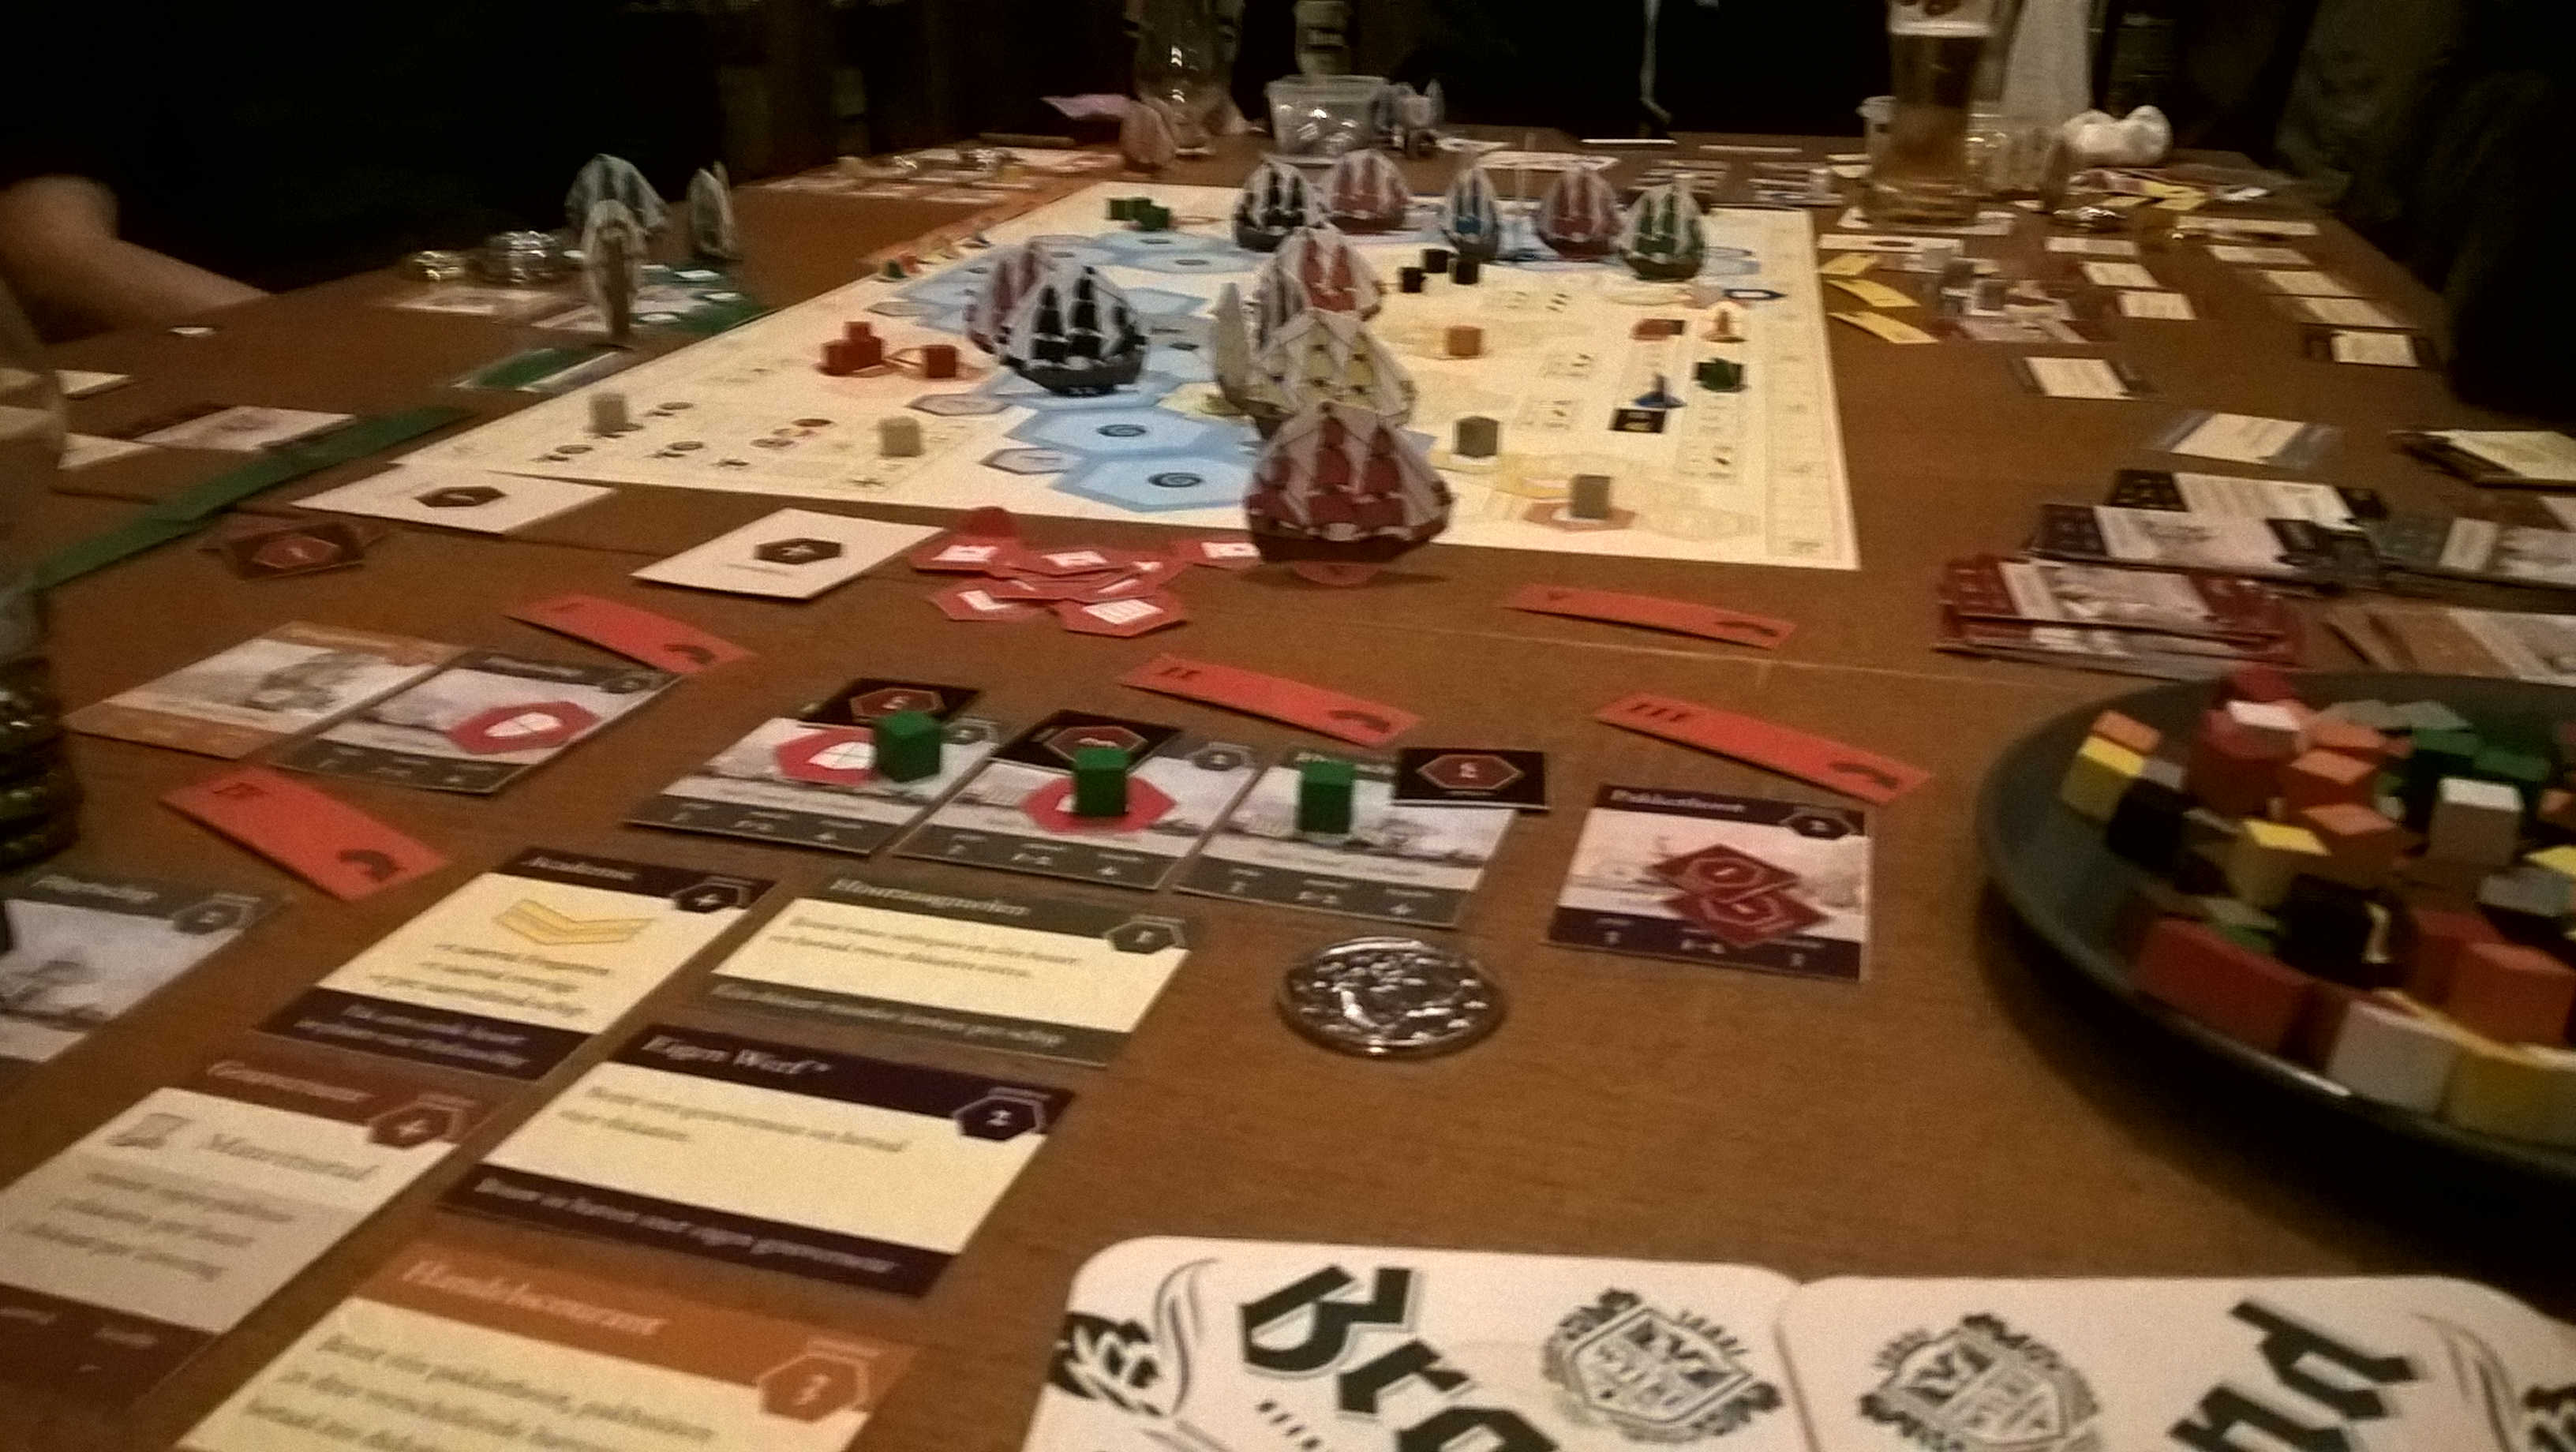 The full game board of the Admiralen board game in the middle of a play test session with card of both players at each side.